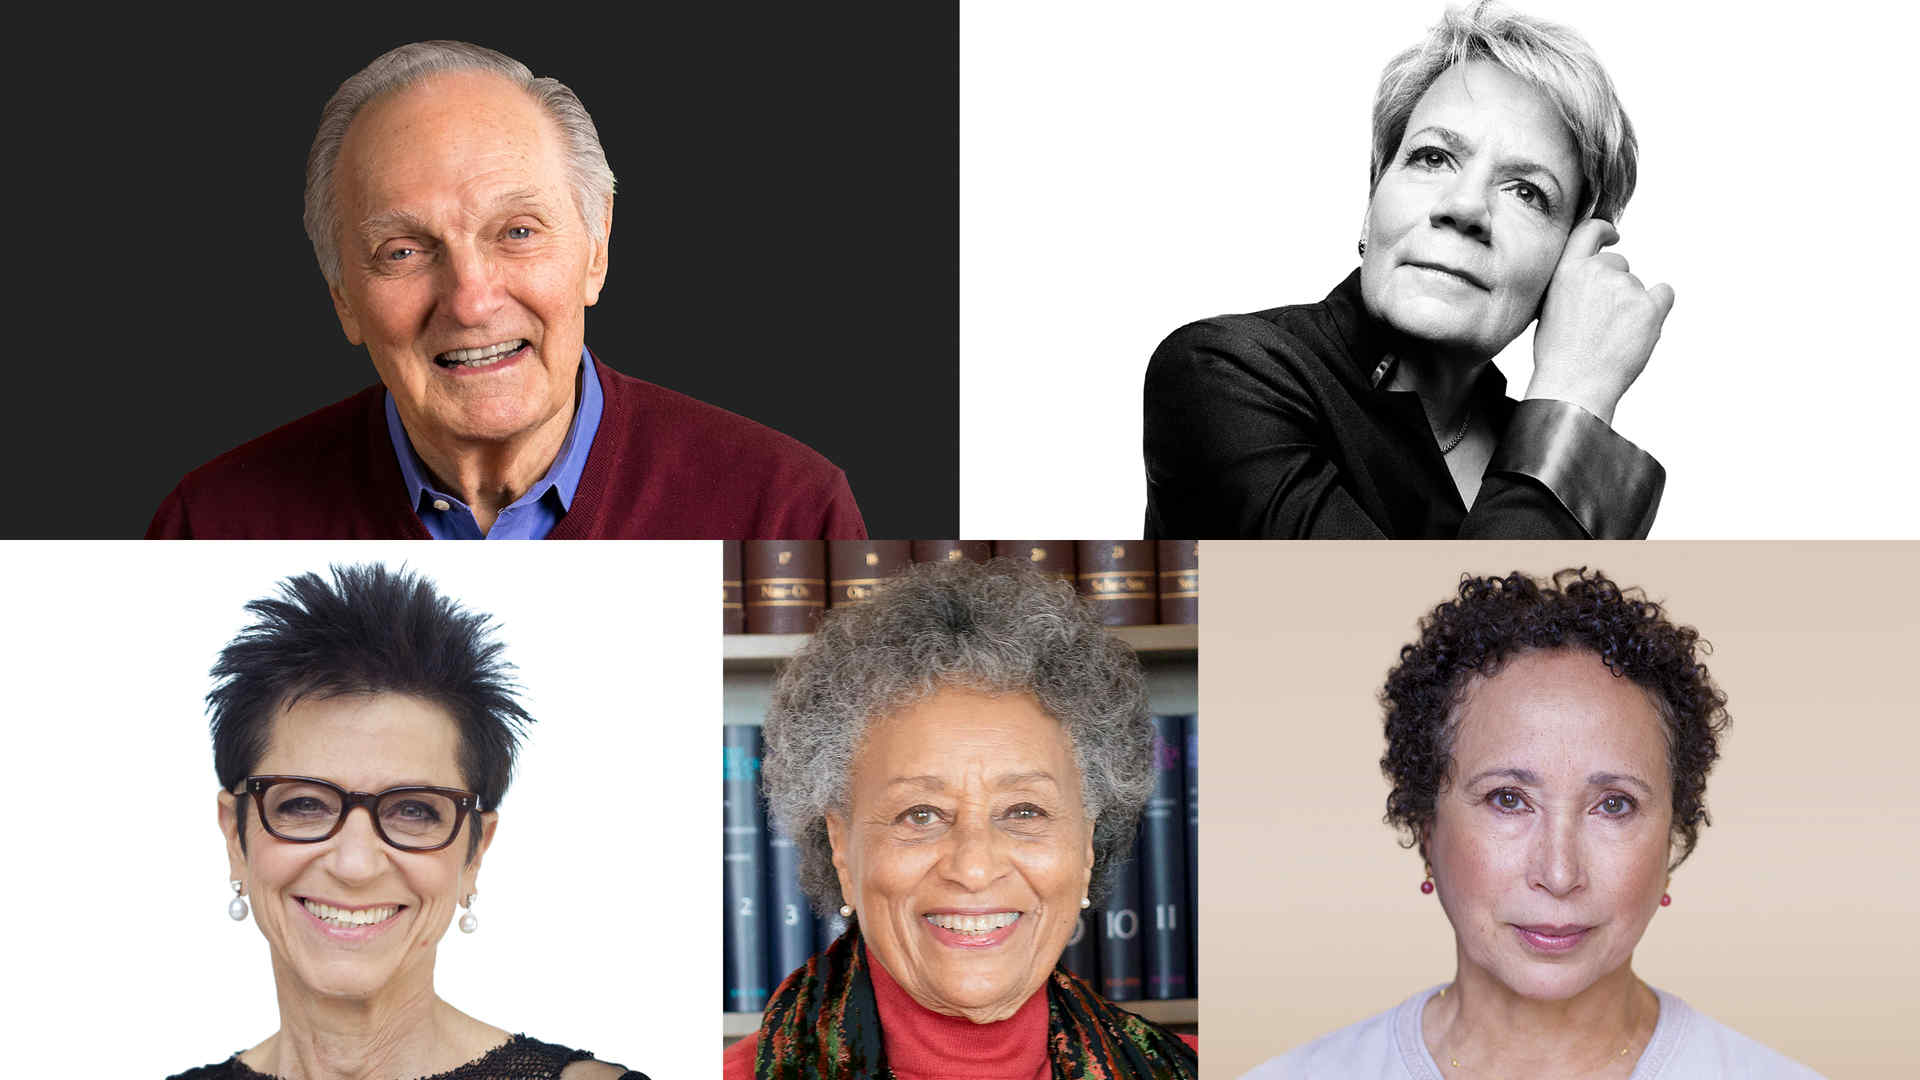 Collage of headshots of the honorary degree recipients. Clockwise, from upper left: Alan Alda, Marin Alsop, Virginia Johnson, Reri Grist, and Jody Gottfried Arnhold